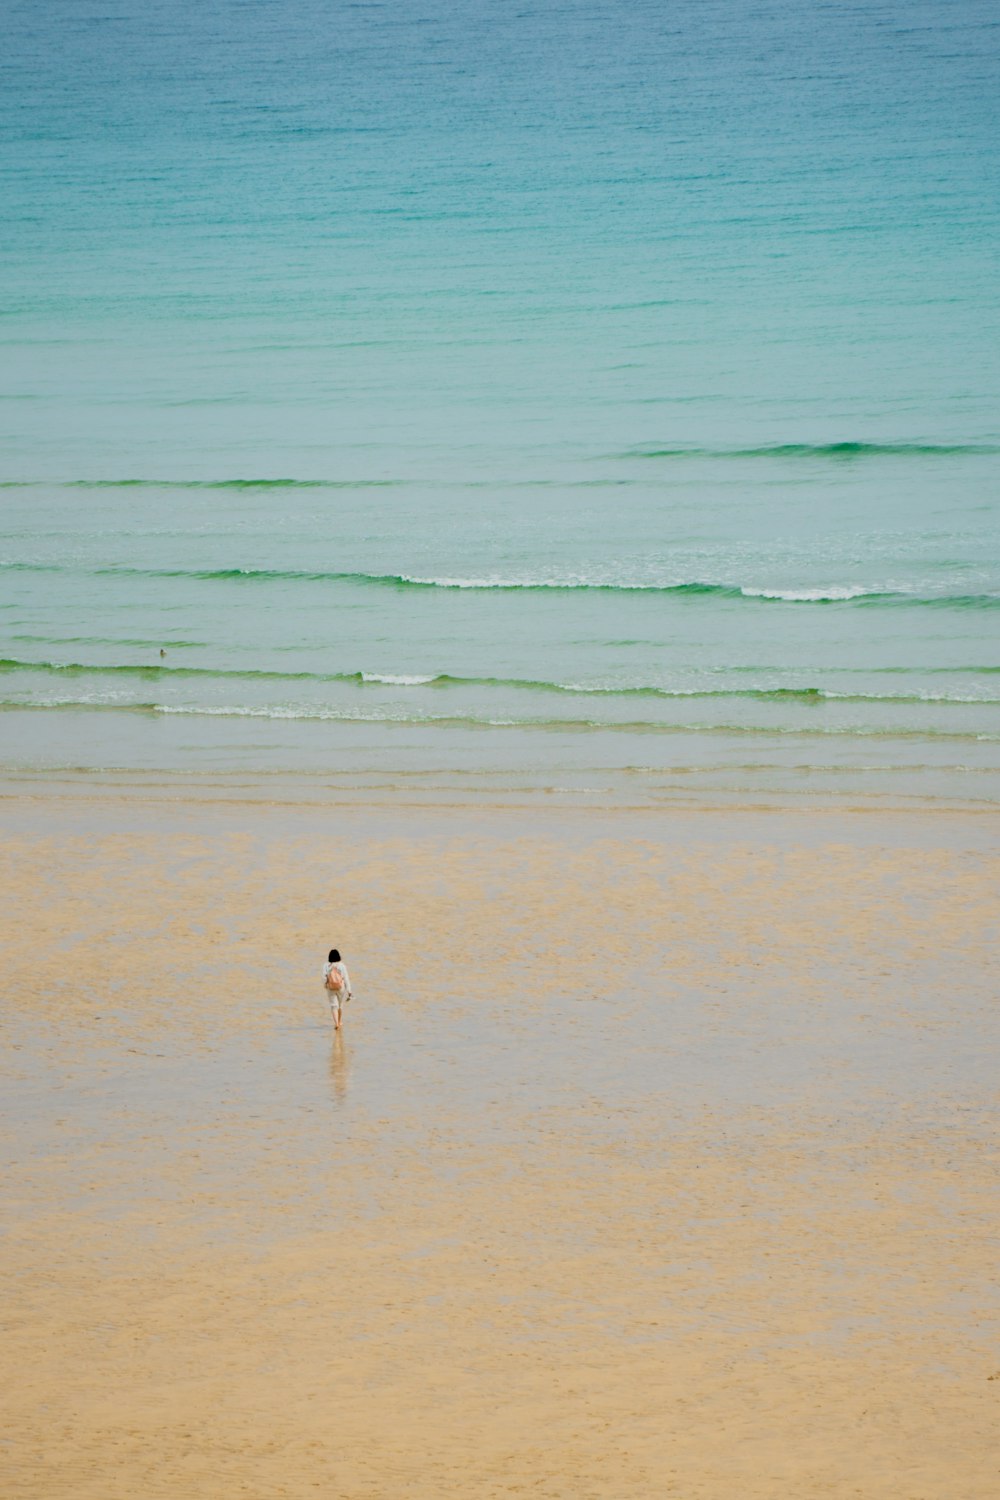 a lone bird standing in the shallow water of a beach